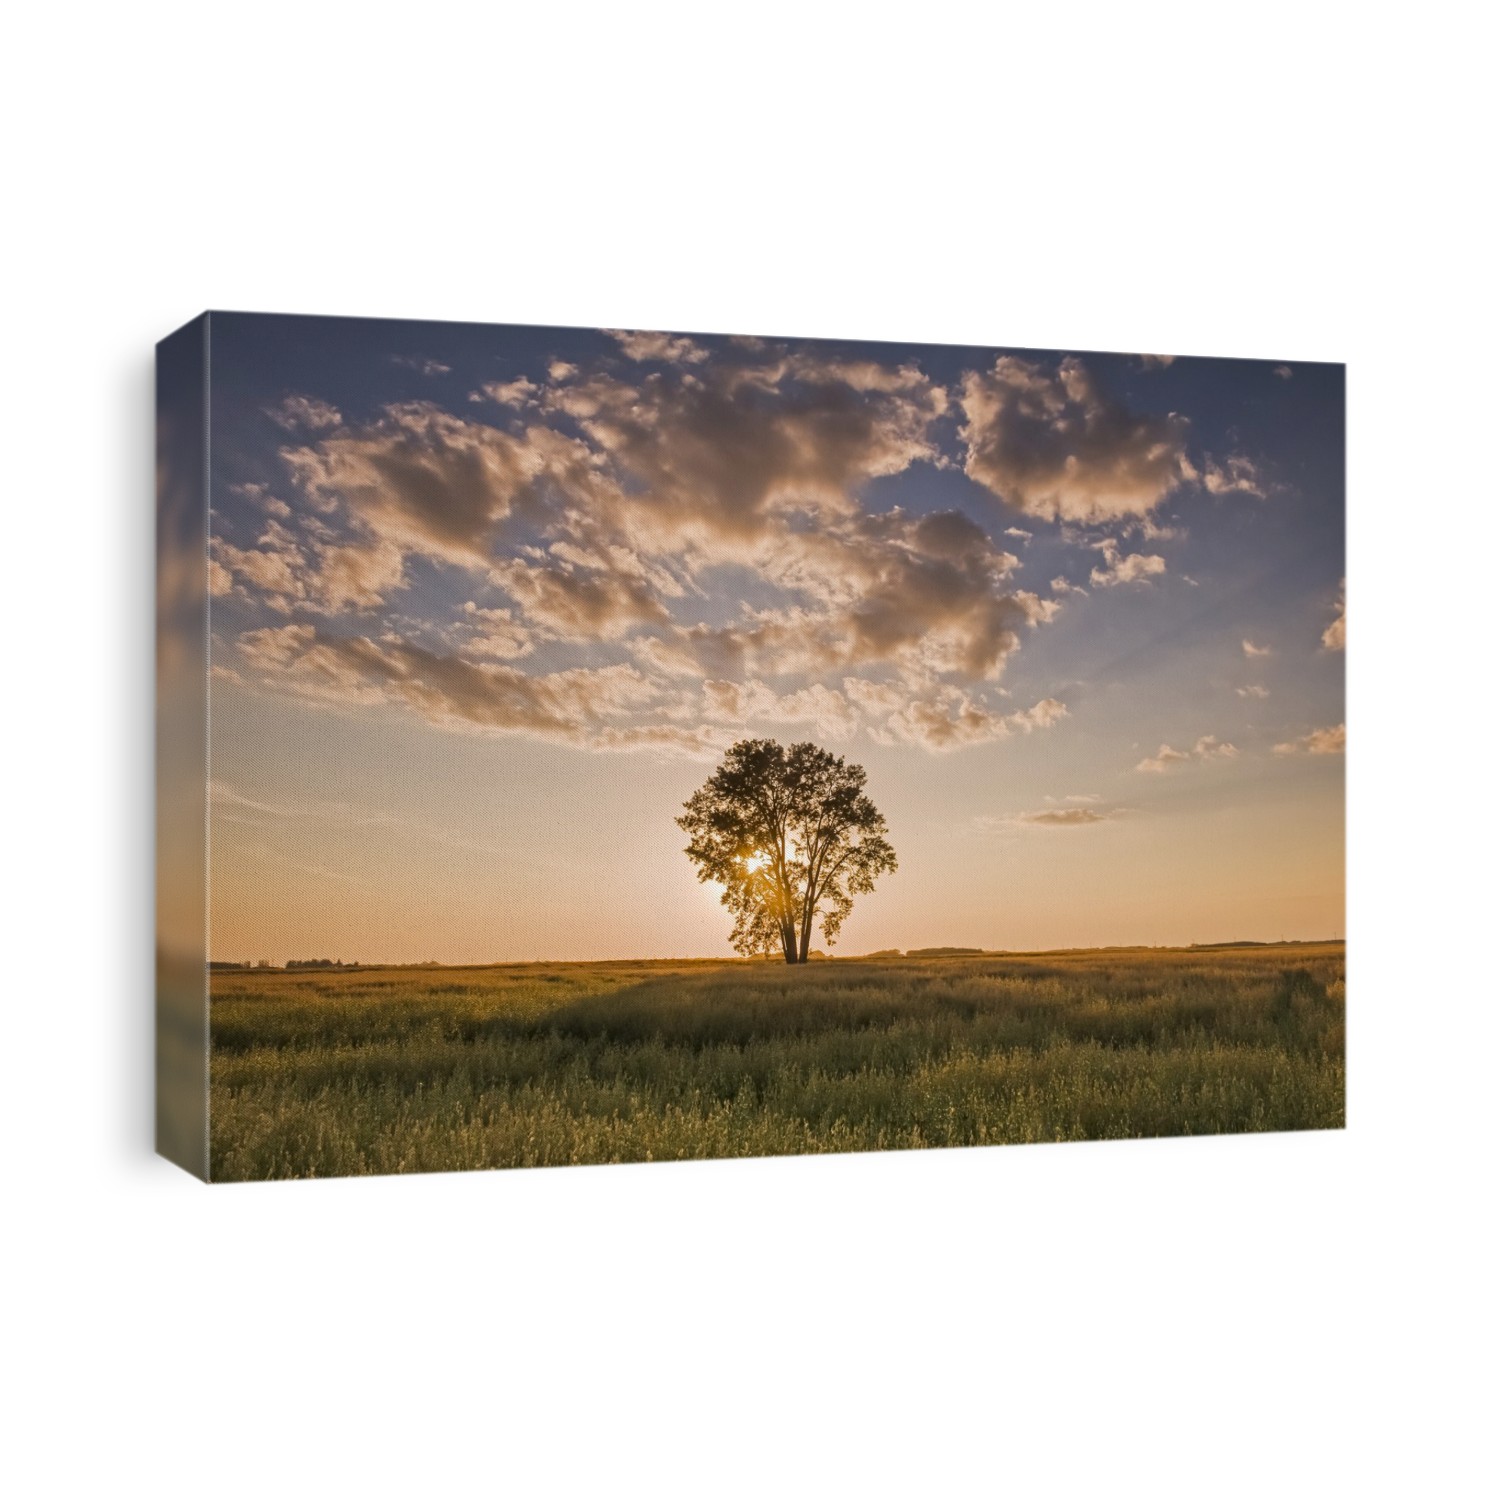 Oat field with cottonwood tree at sunset, near Dugald; Manitoba, Canada